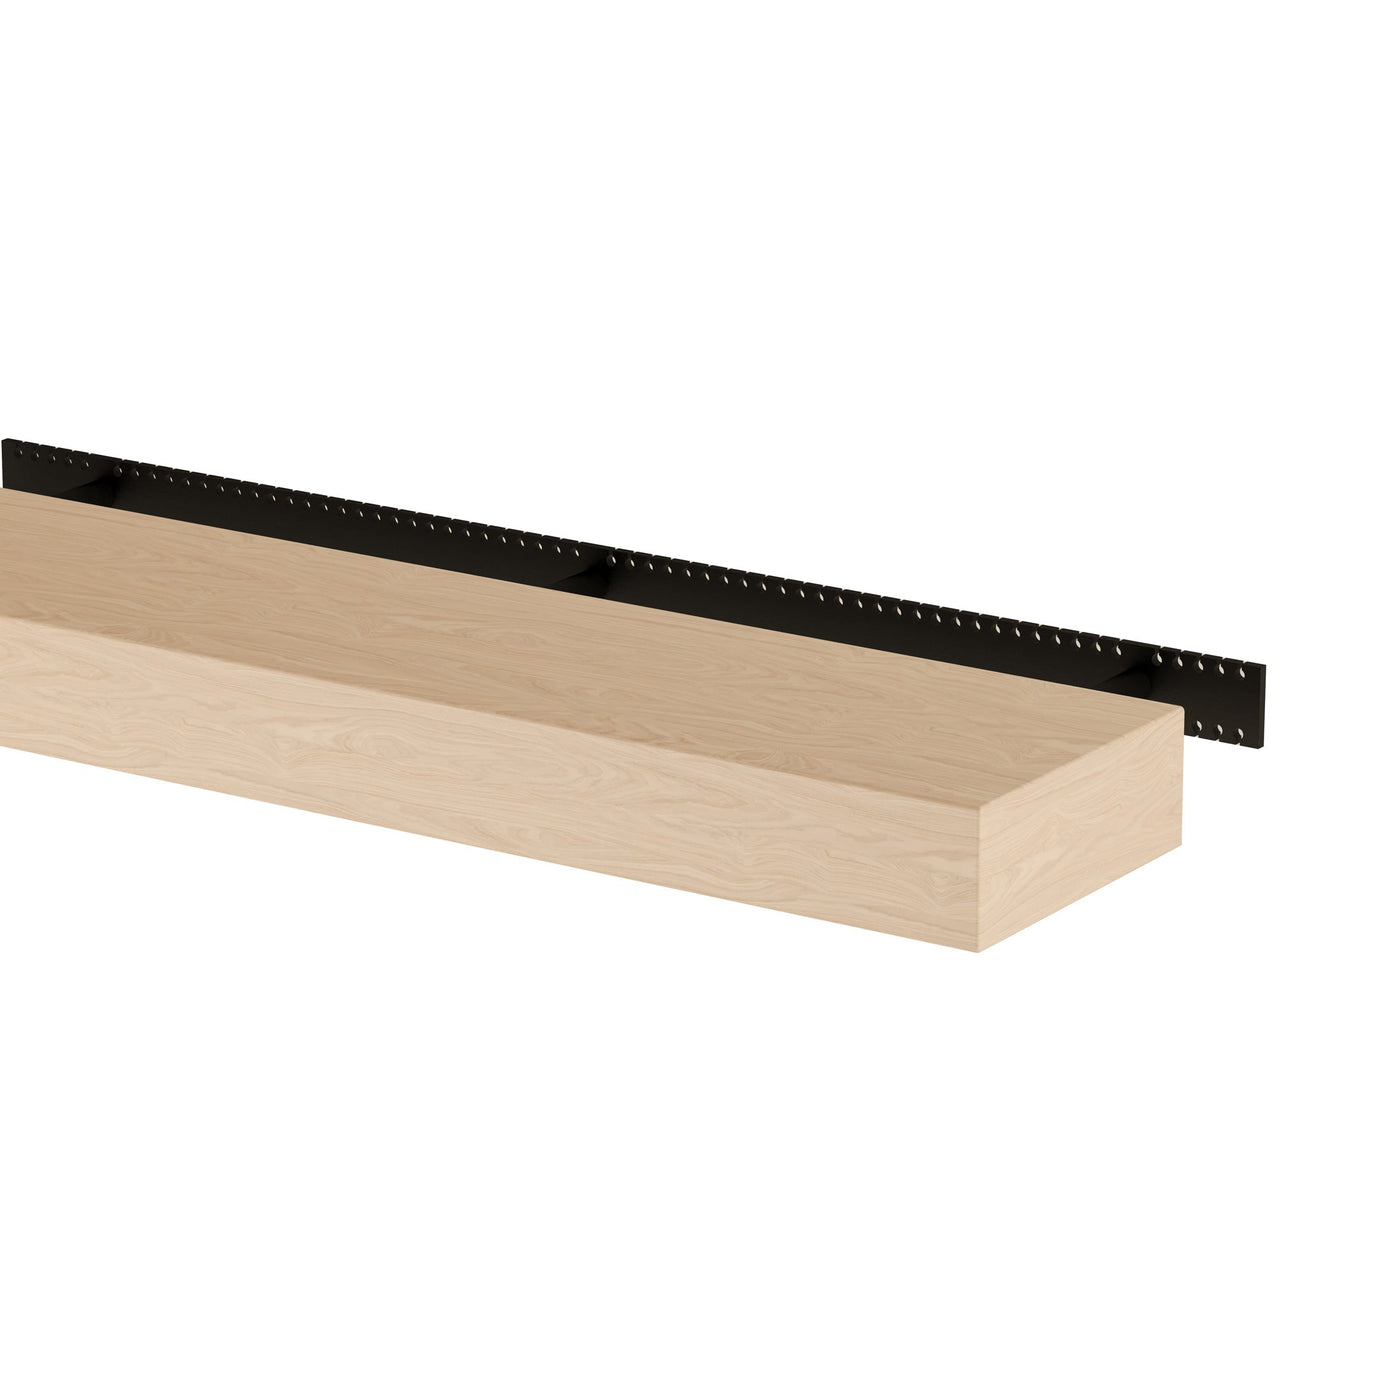 Floating Shelf- Cotton White Oak - 2 Inches Thick